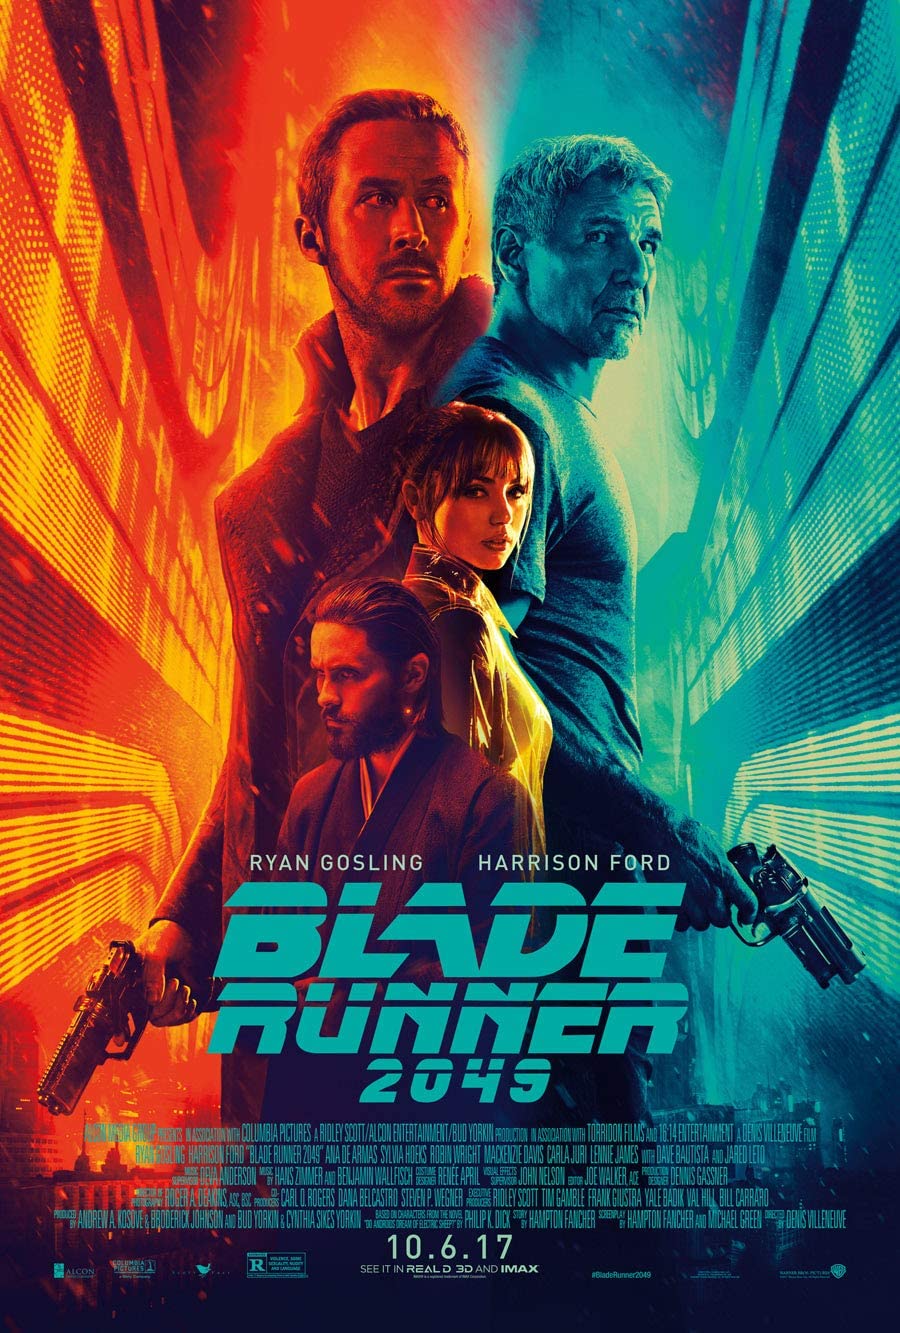 Blade Runner 2043 poster from successful Lost Boys School of VFX alumni film credits for Visual Effects.